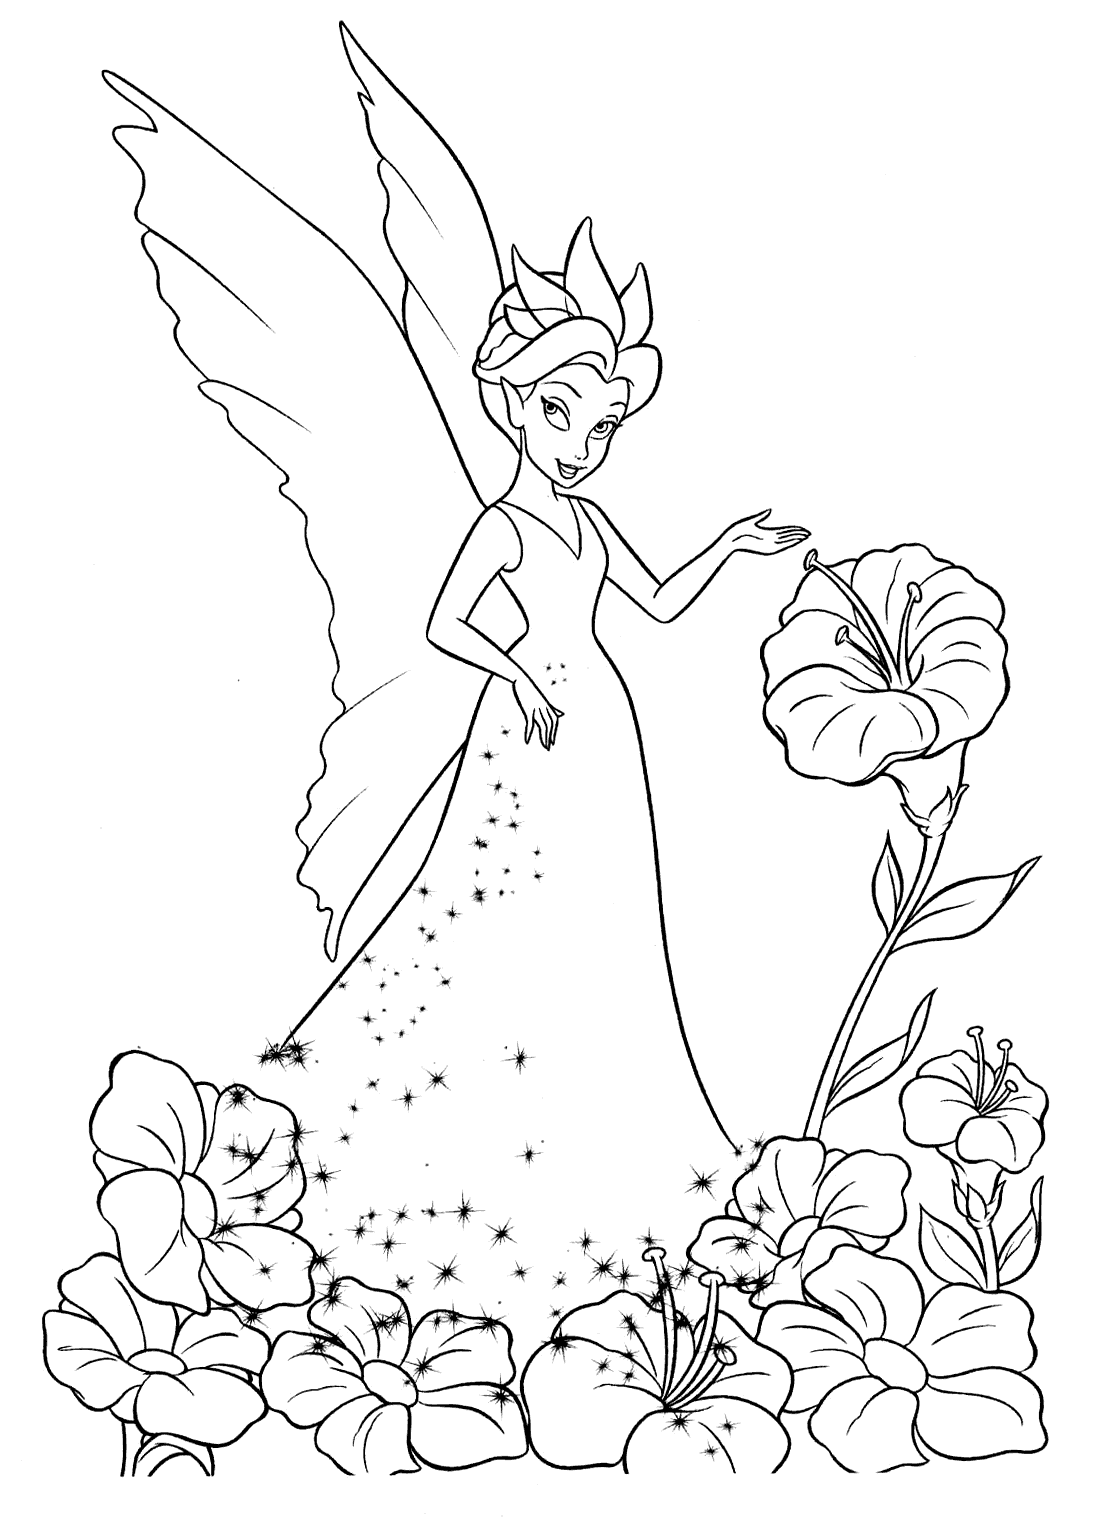 Coloring page - Fairy near a flower